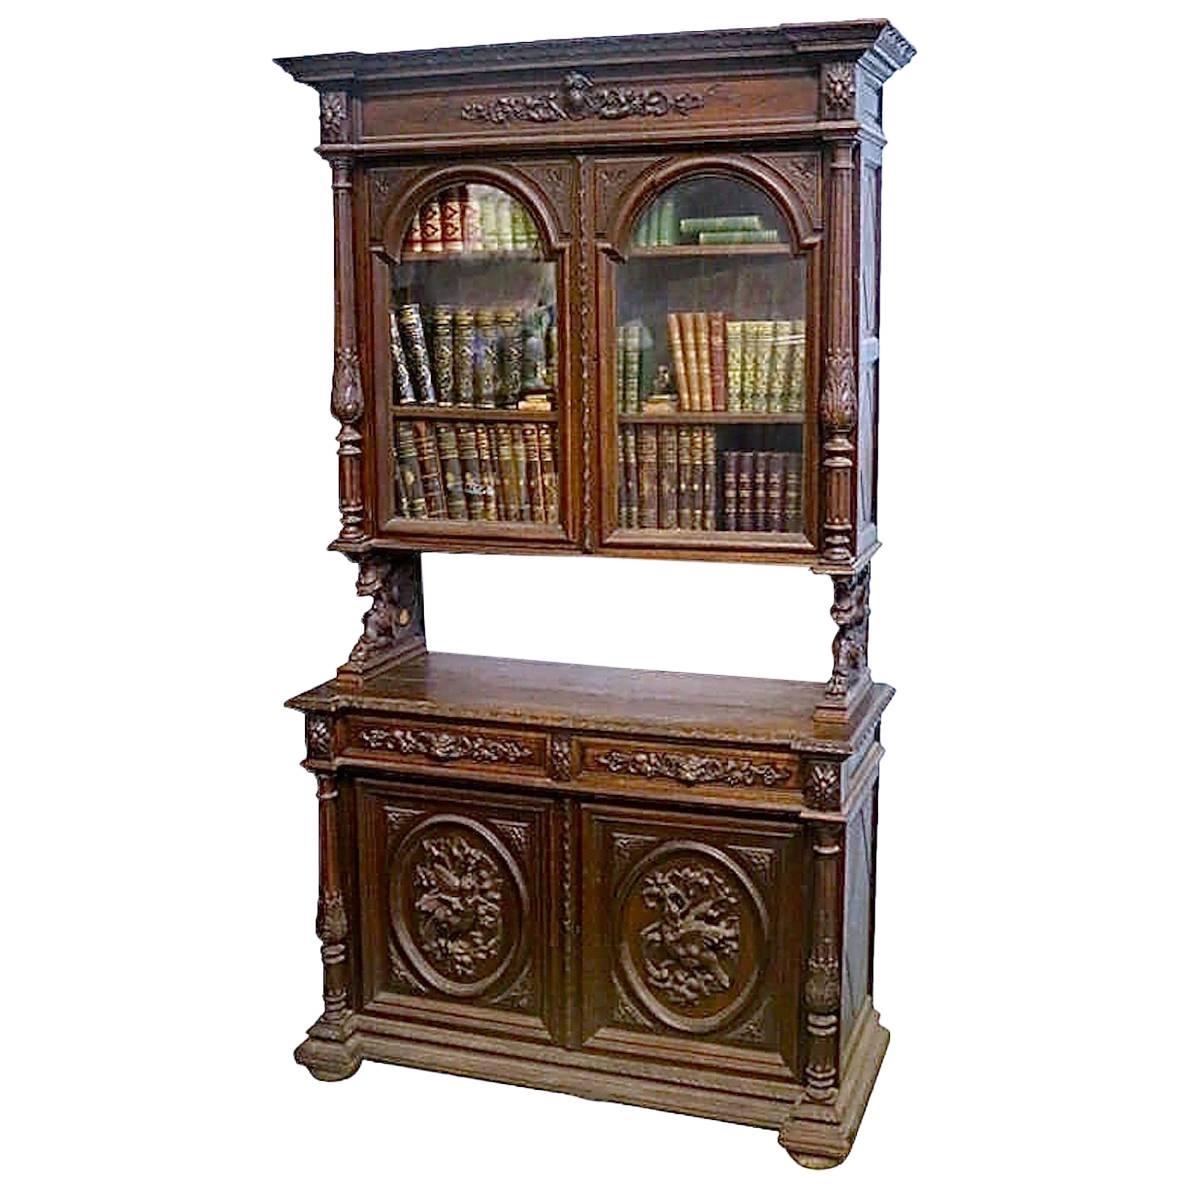 Tycoon's Carved Flemish Antique Buffet Bibliotheque, circa 1850 Provenance For Sale